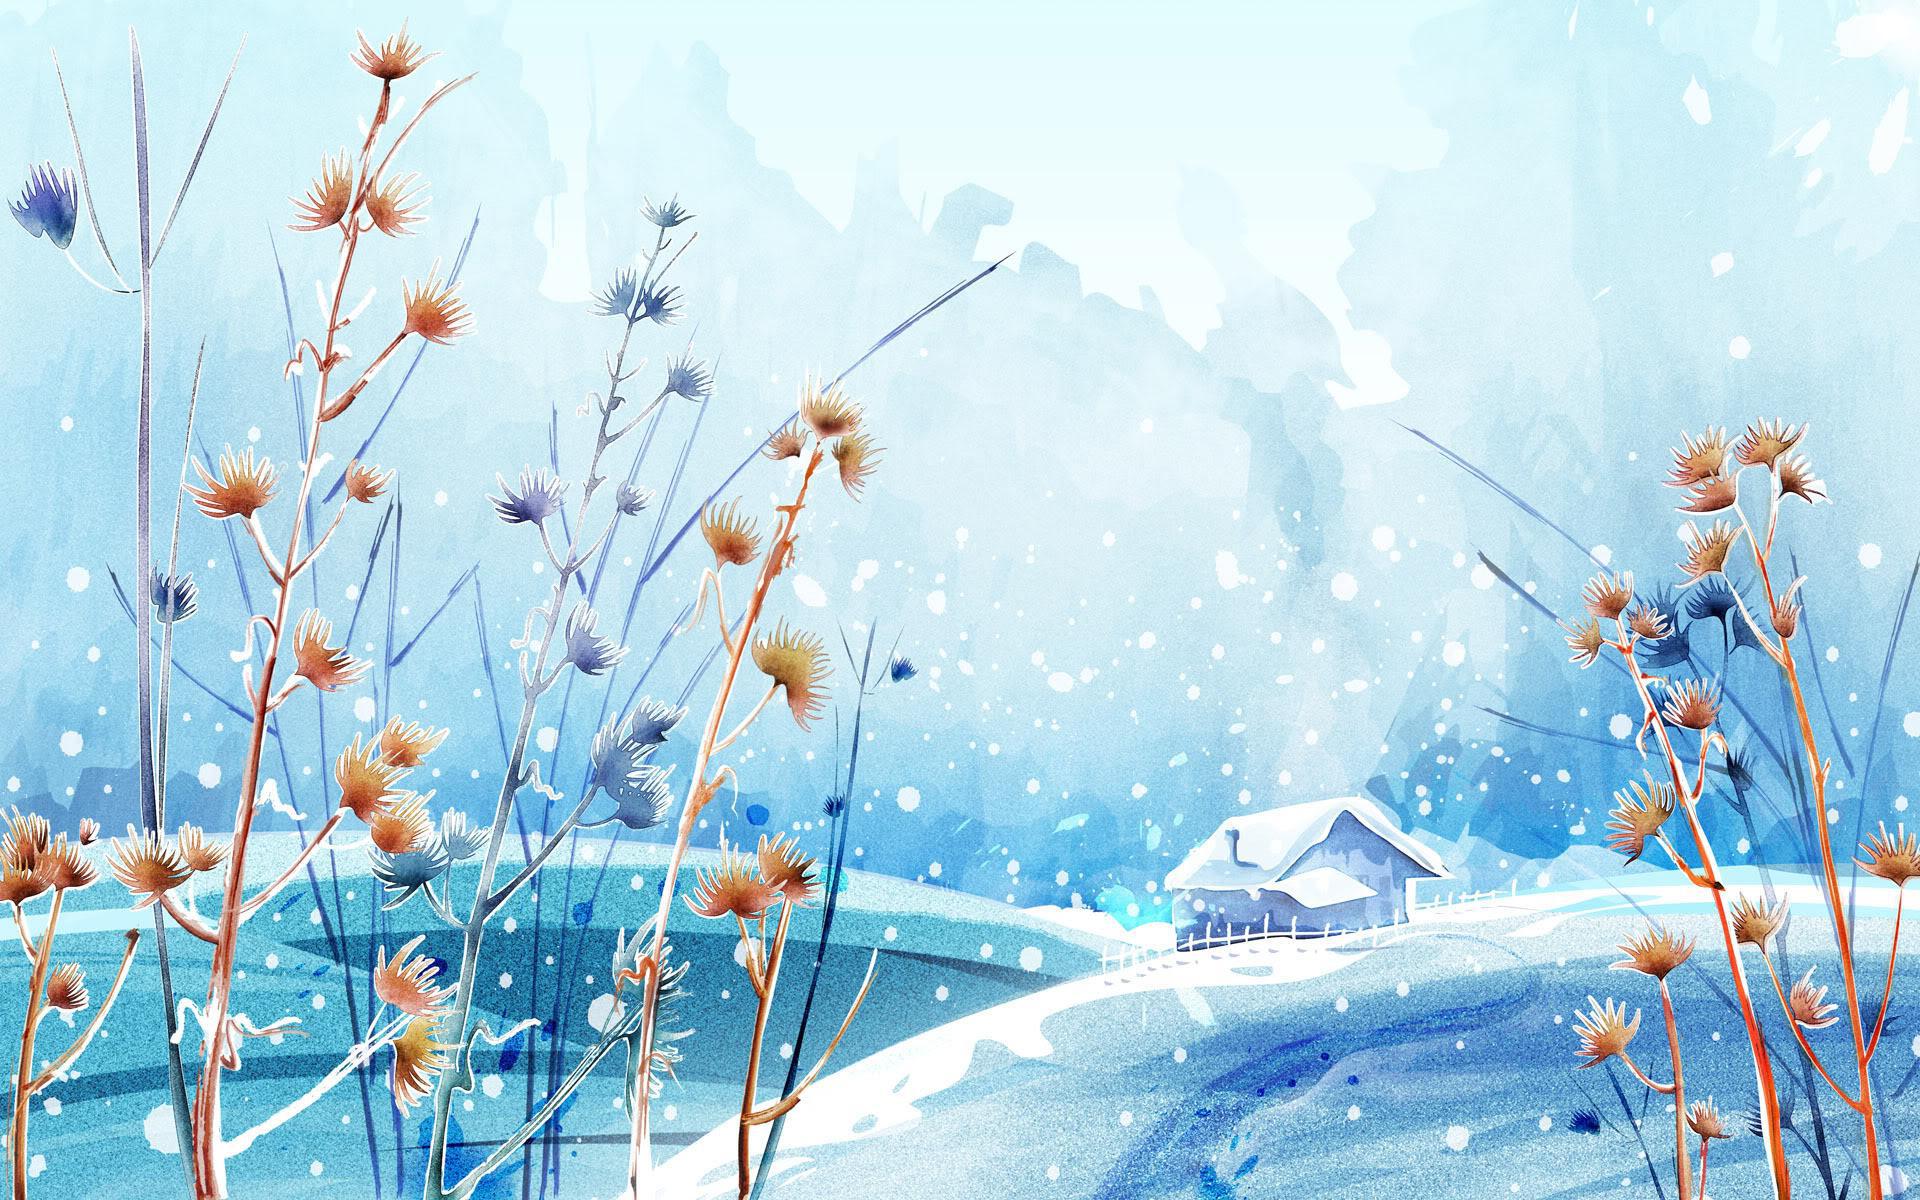 Windows Backgrounds winter, pictures, turquoise